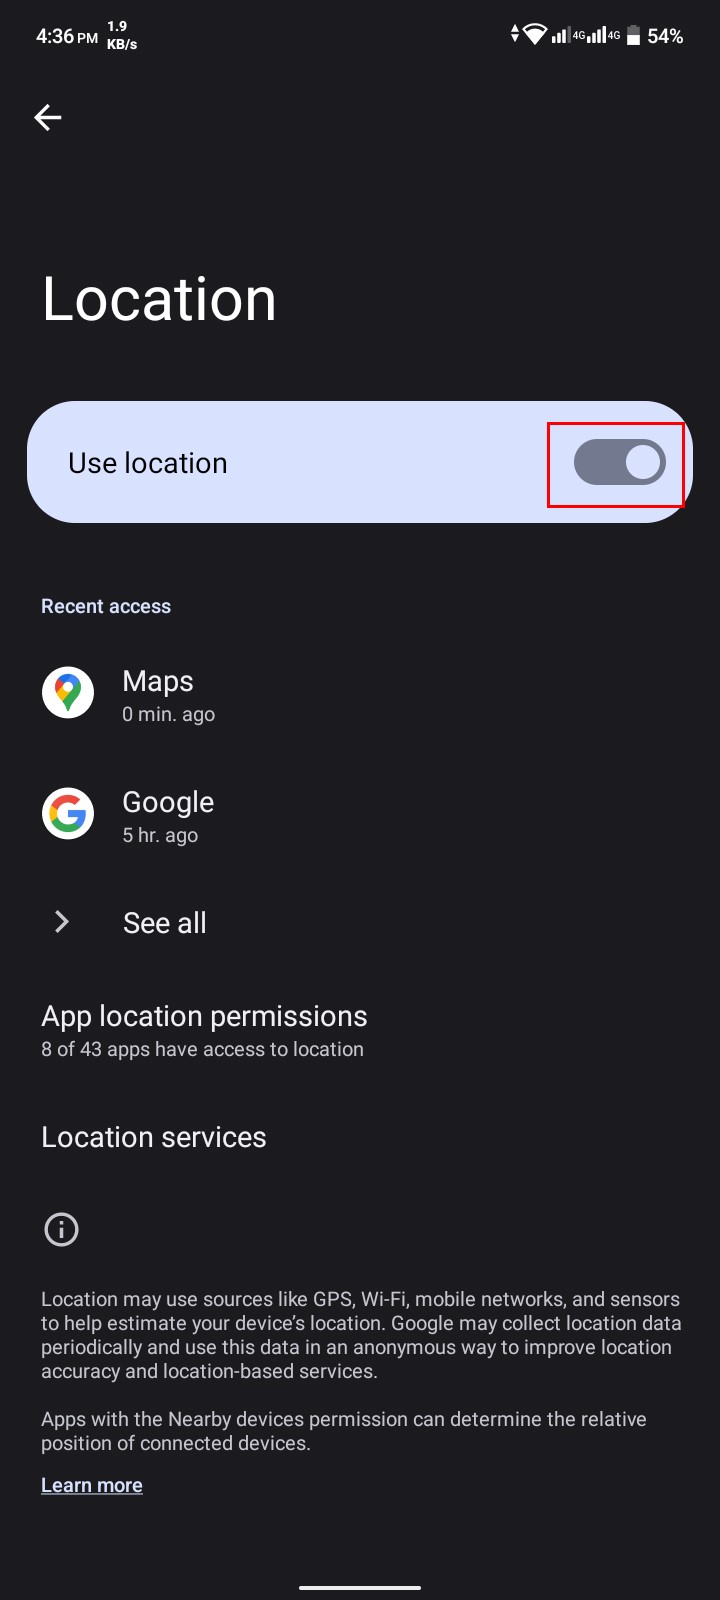 Toggle thе switch to turn off location 